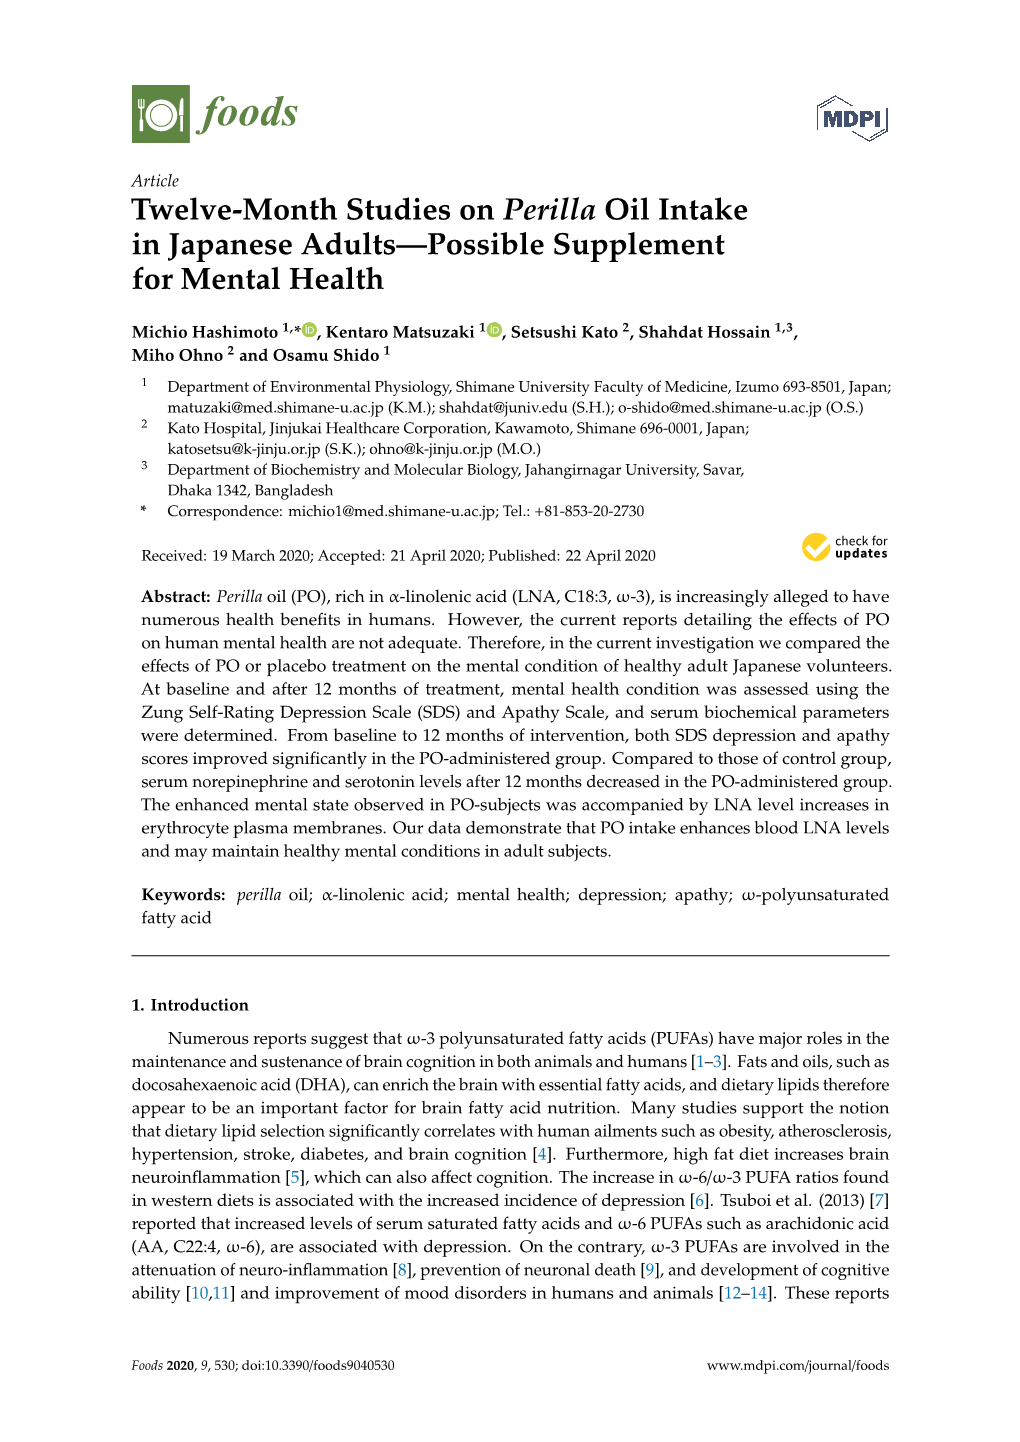 Twelve-Month Studies on Perilla Oil Intake in Japanese Adults—Possible Supplement for Mental Health